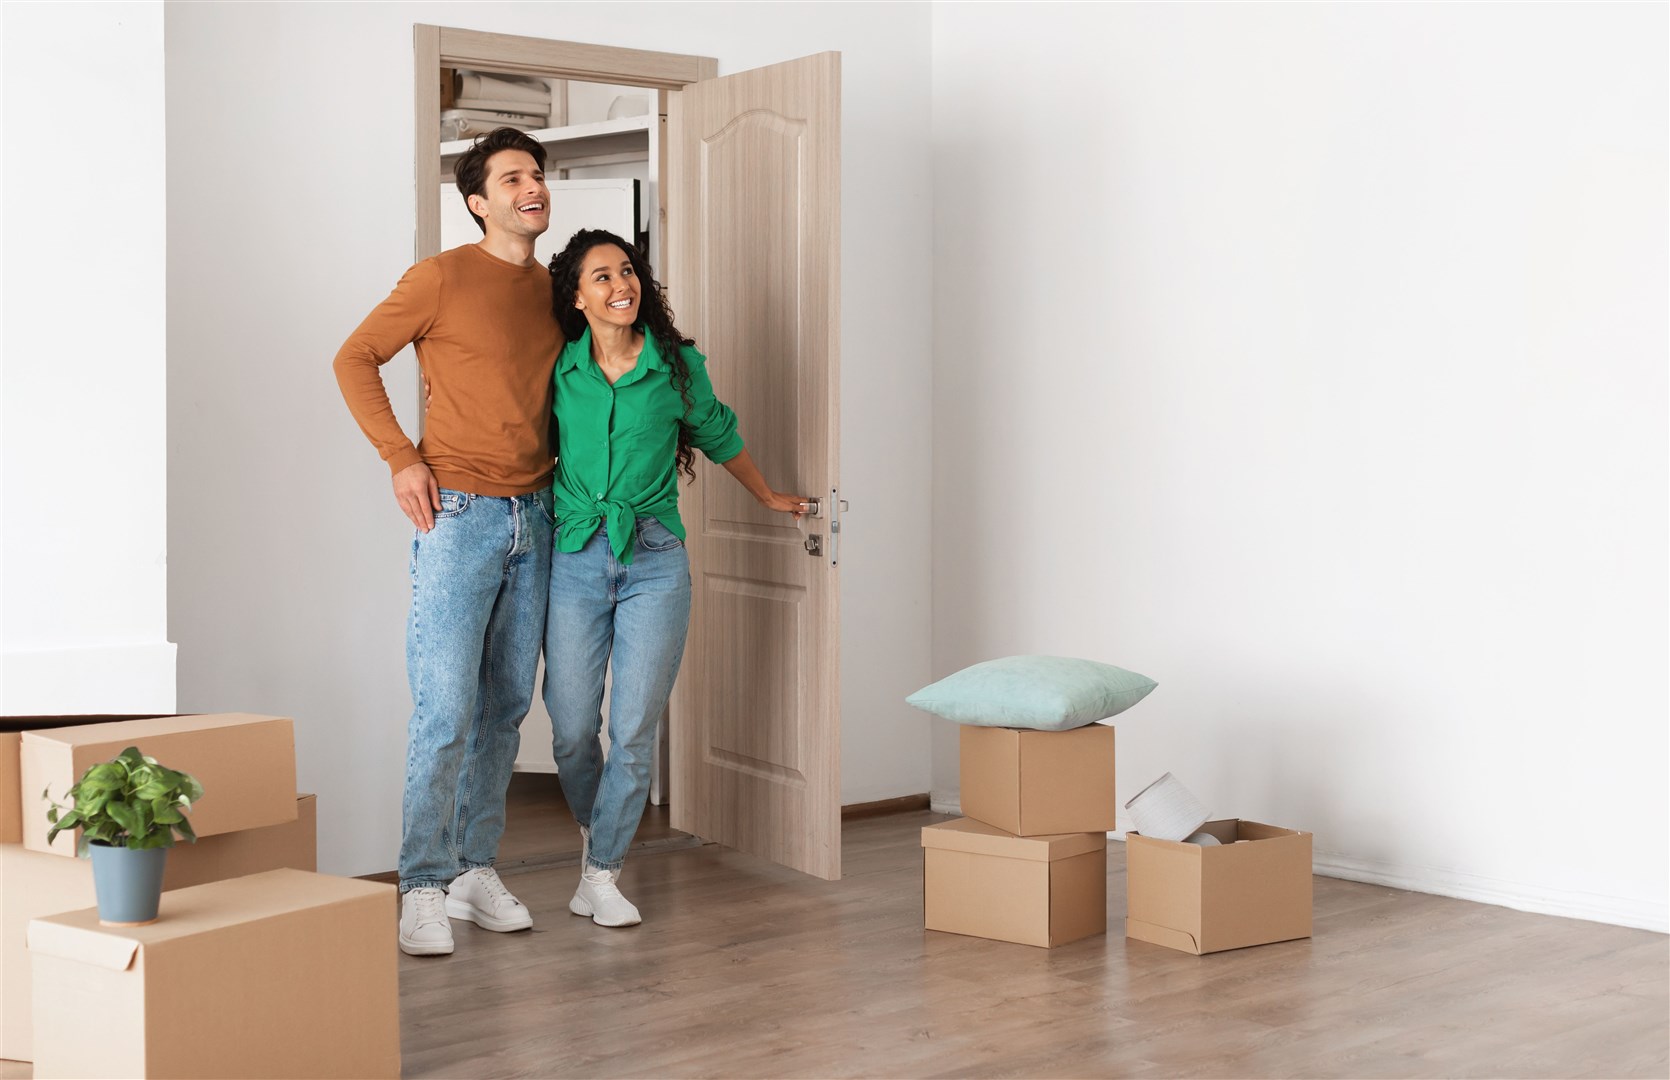 Selling a nice empty space might be easier than the rather well-lived in look...